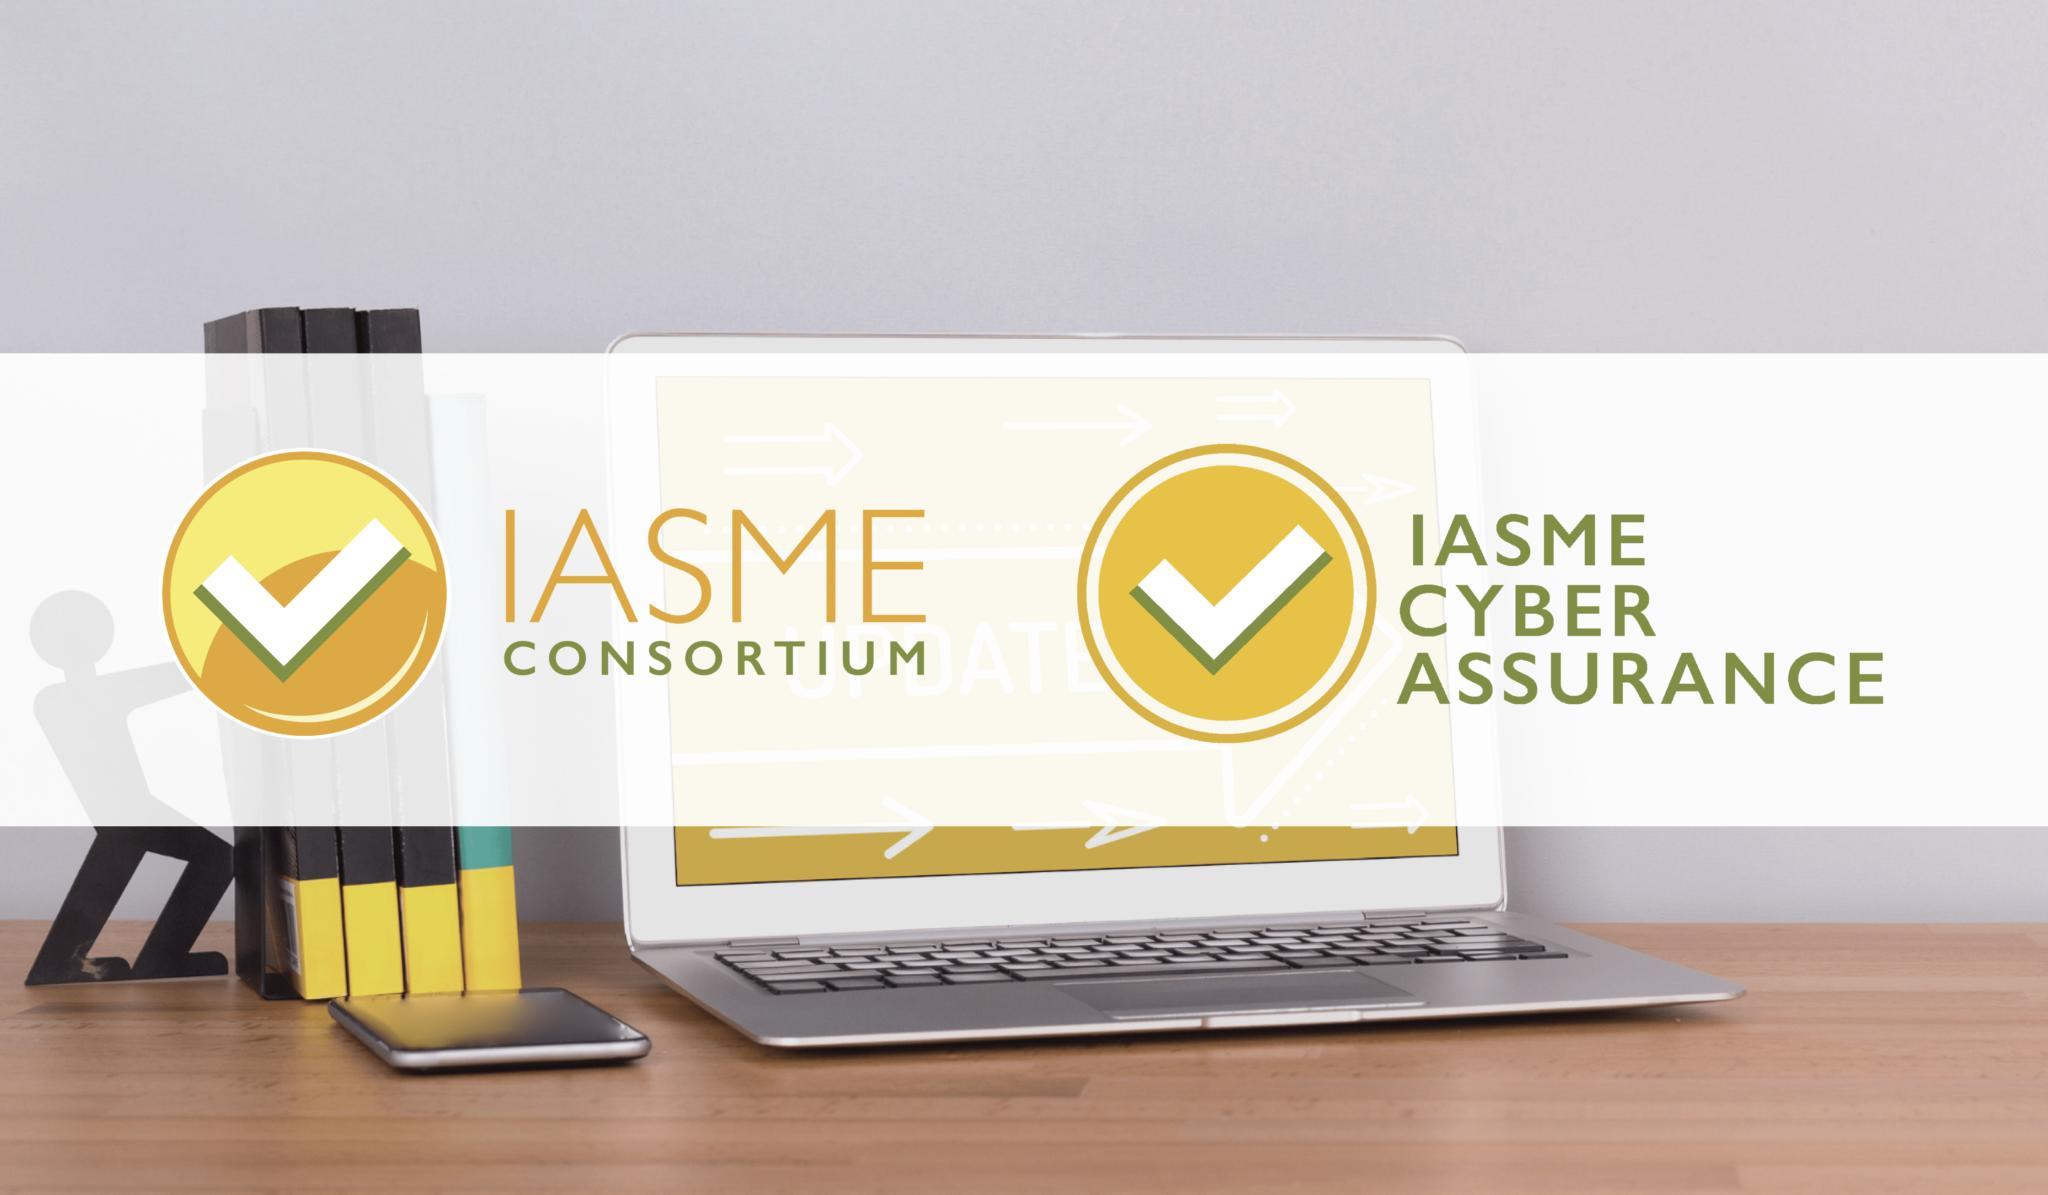 Announcing the relaunch of IASME Cyber Assurance on the 25th July 2022, formerly IASME Governance